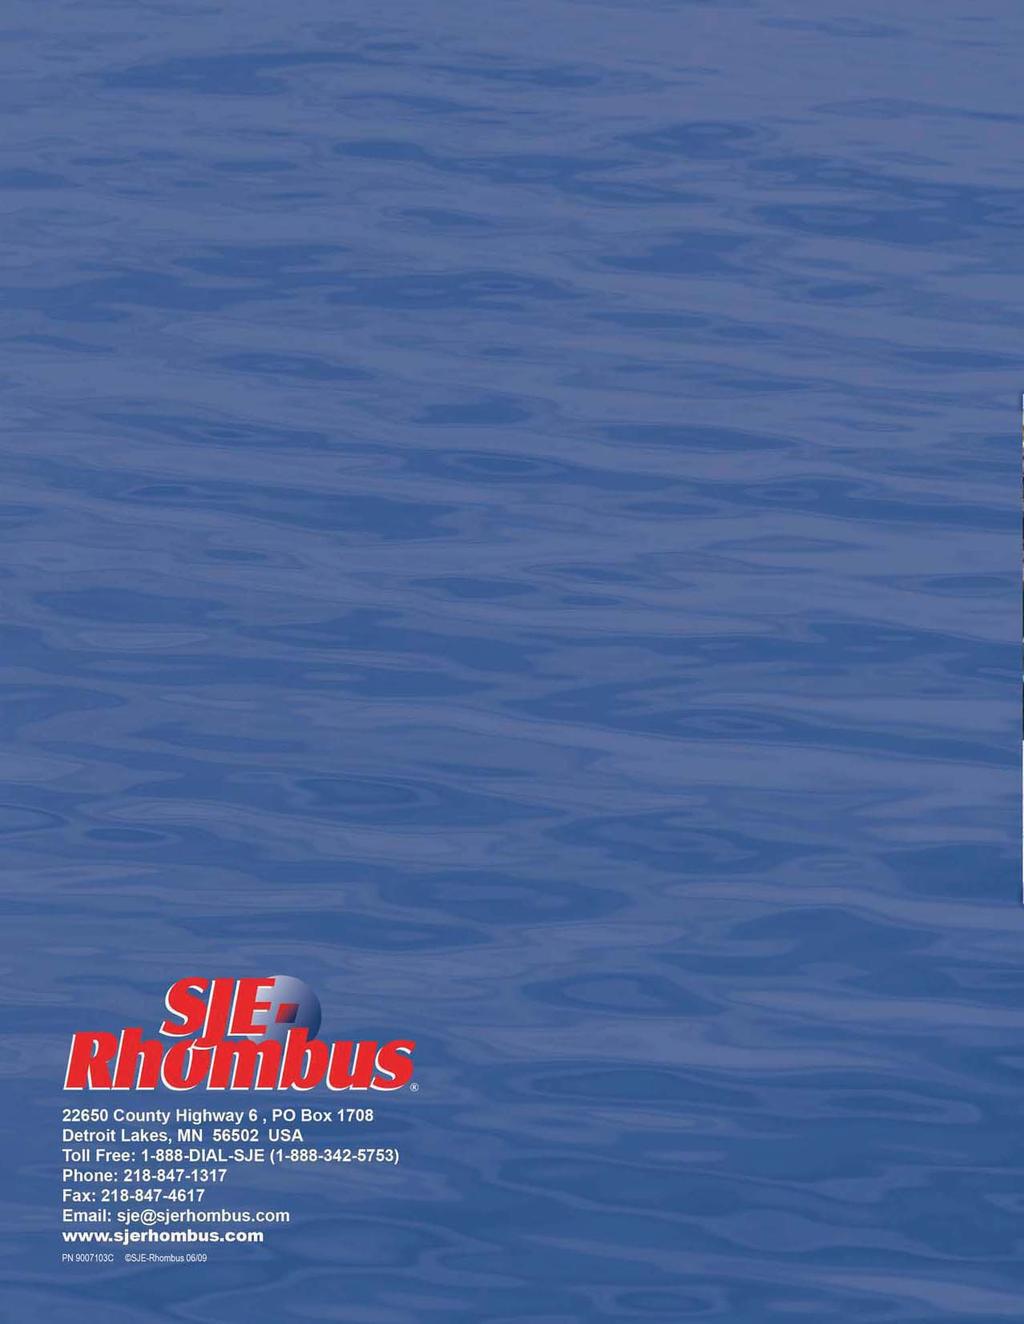 About SJE-Rhombus For over 30 years, SJE-Rhombus has worked hard to become one of the most trusted names in the water, wastewater